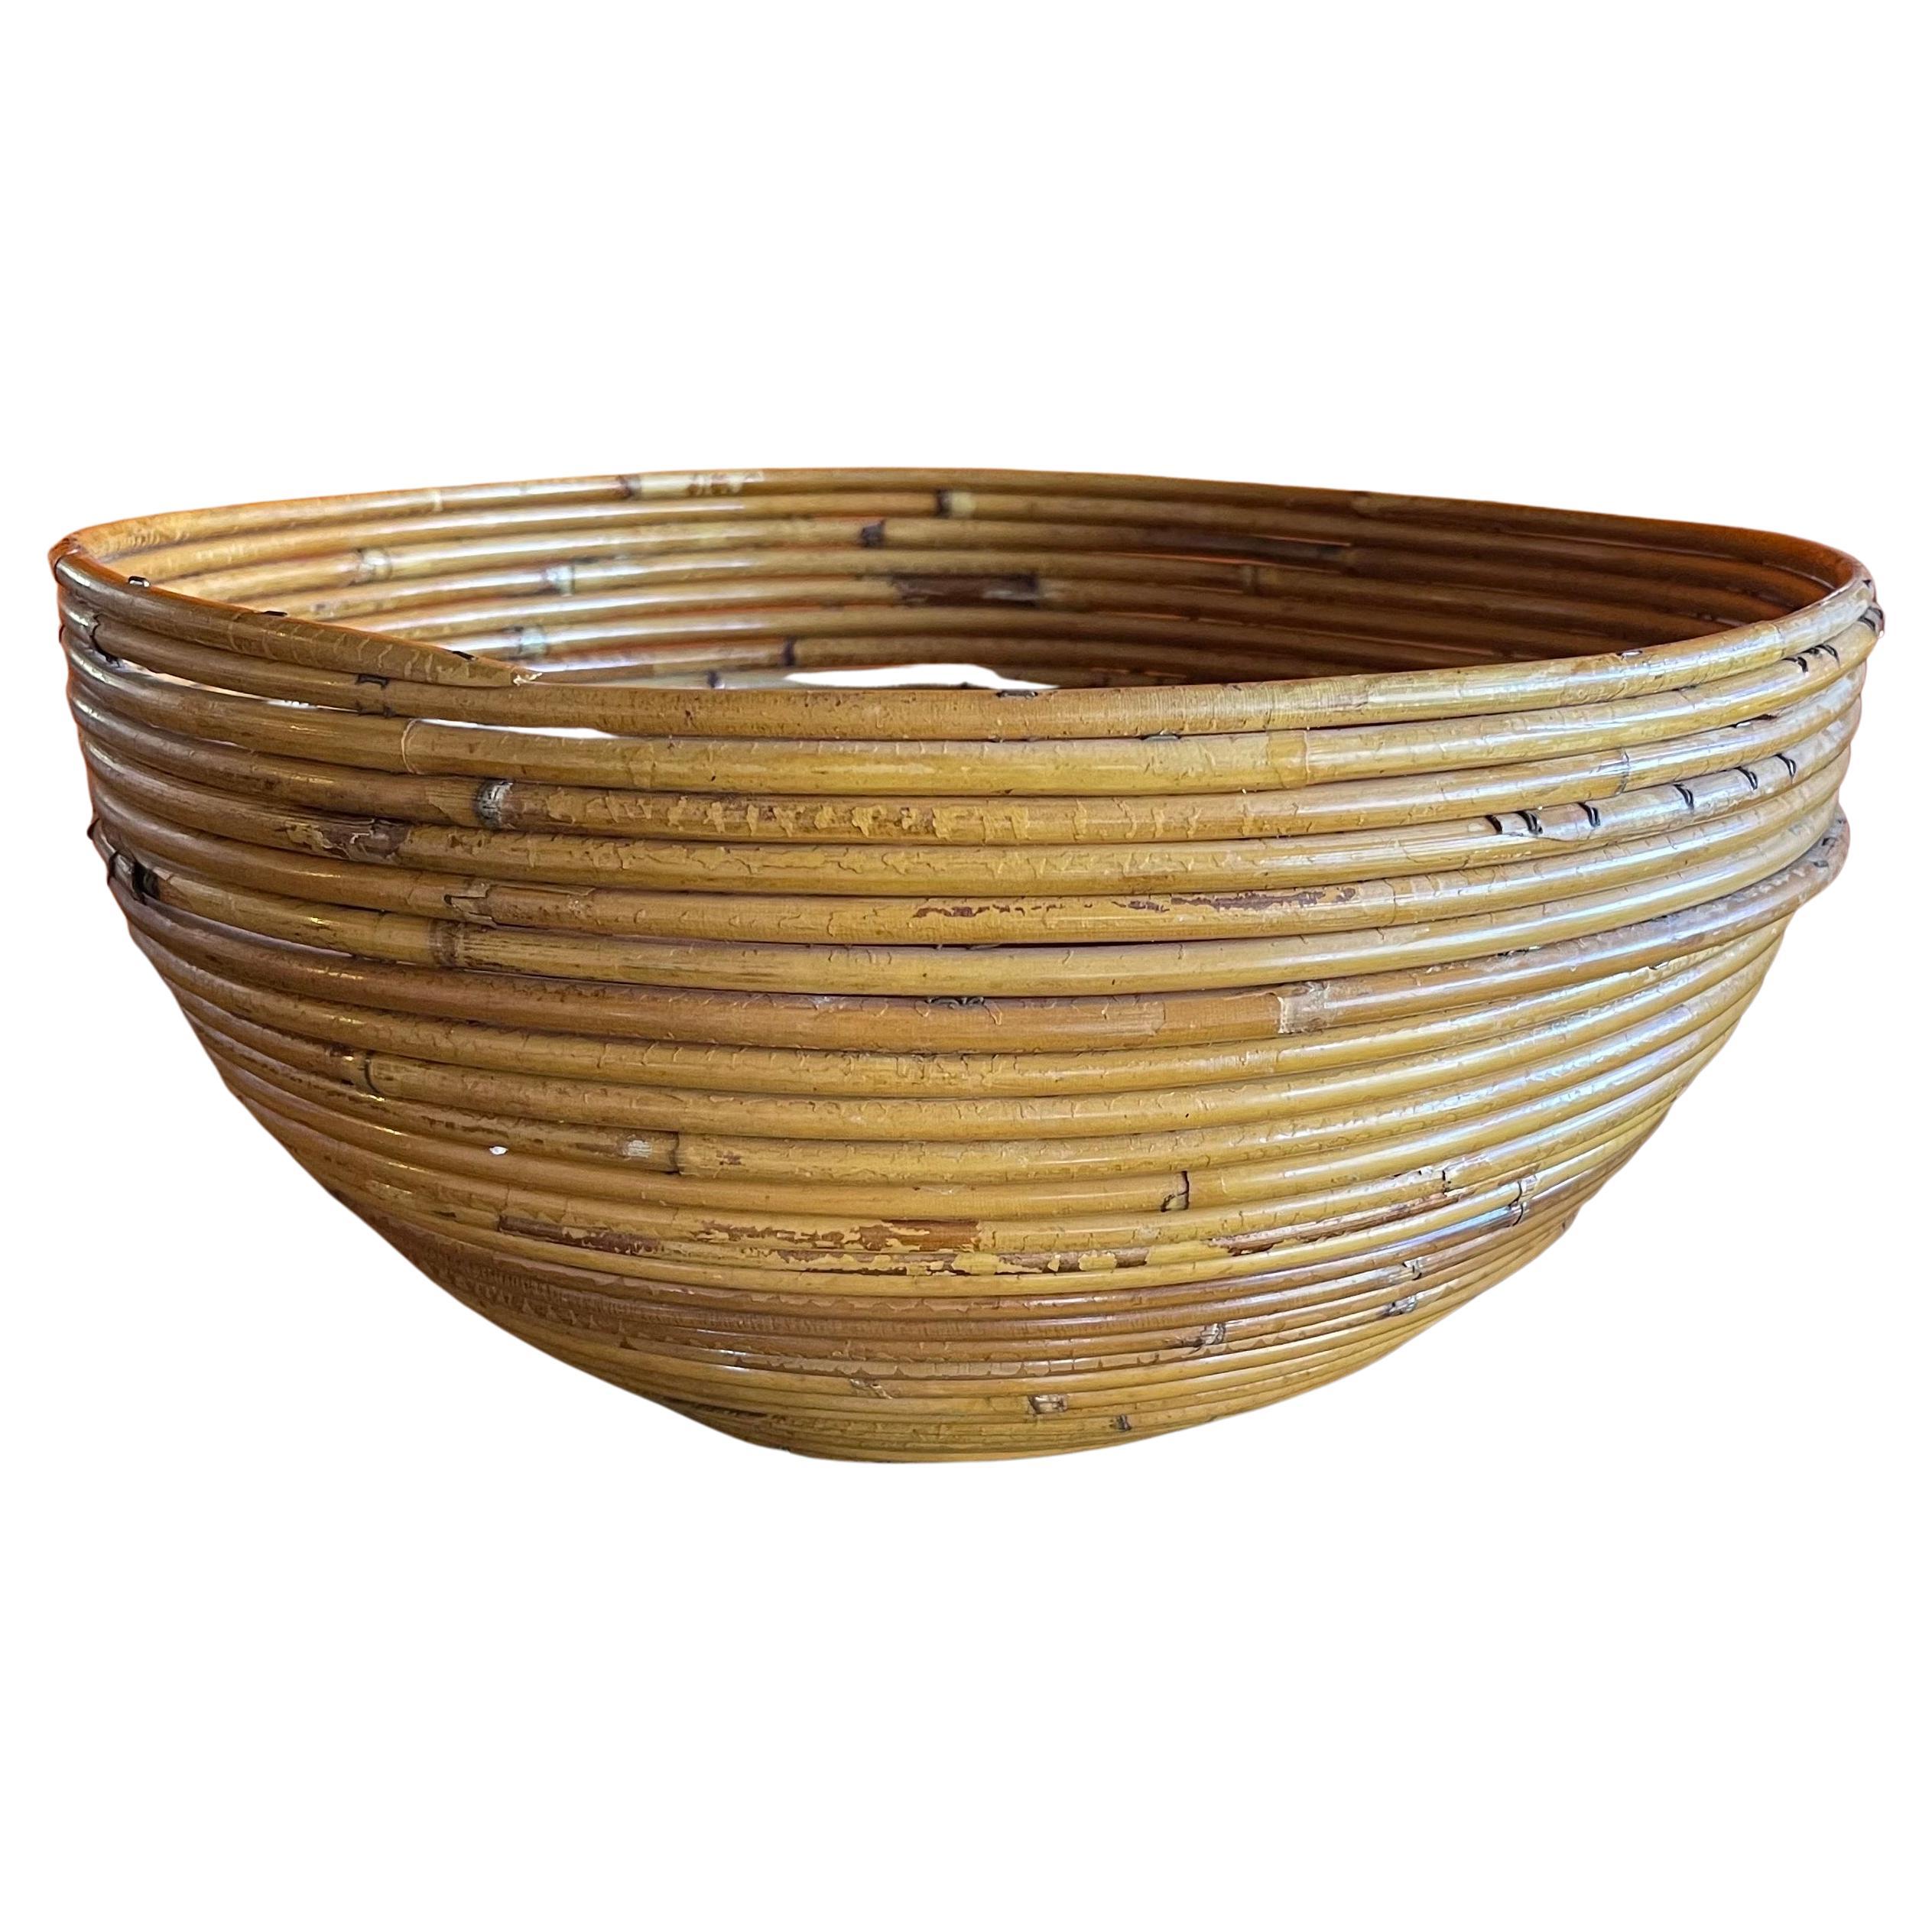 Large Italian pencil reed bamboo basket bowl / planter with plastic liner, circa 1970s. The bowl is in very good vintage condition and measures 14.5